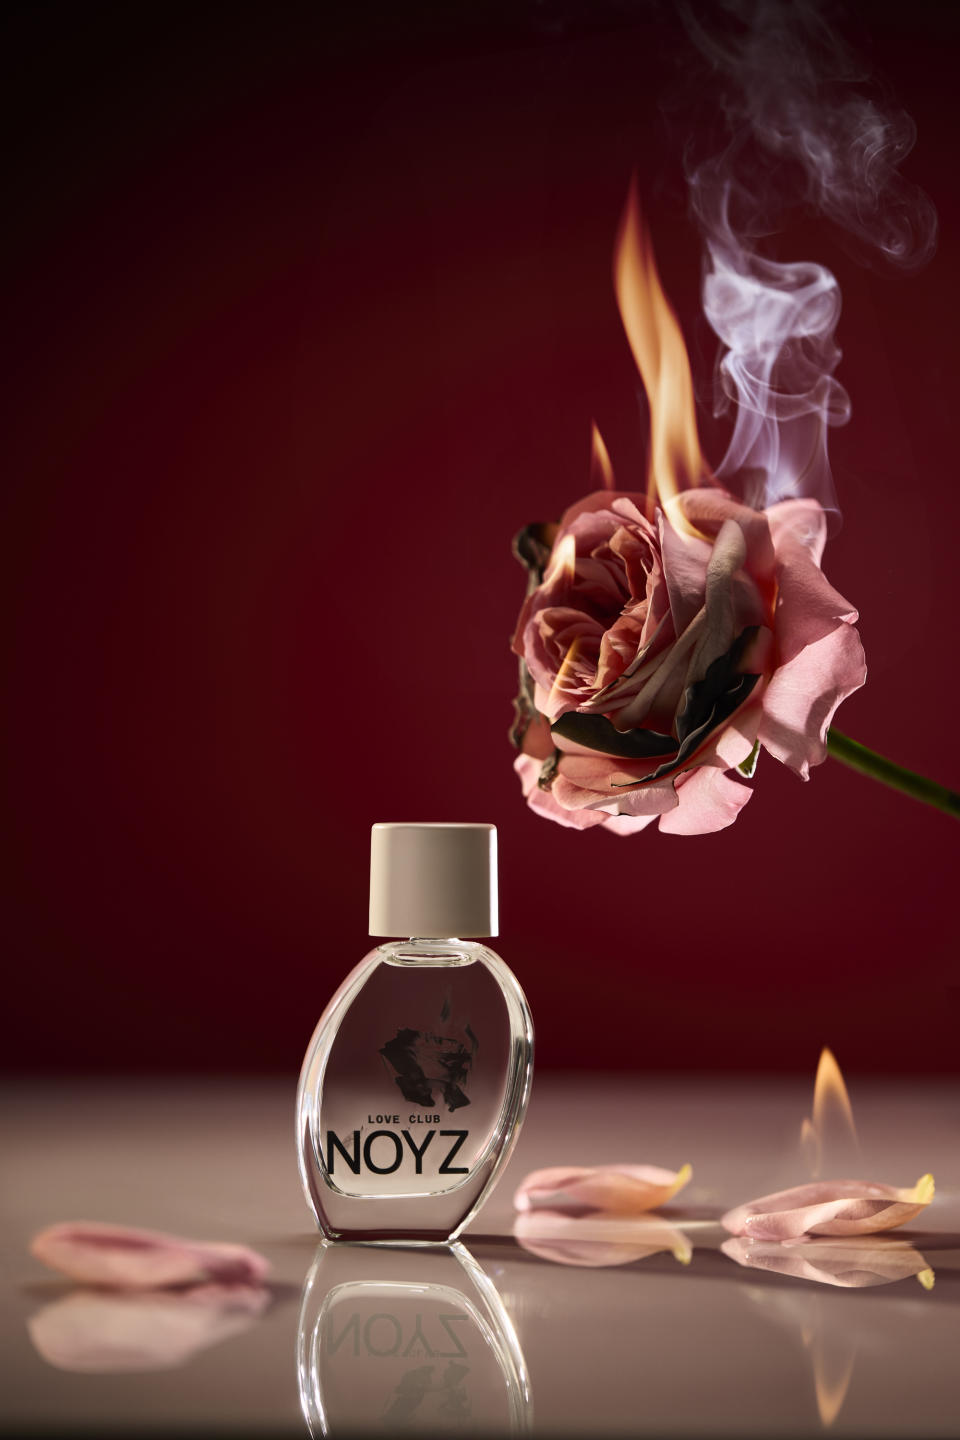 Love Club by Noyz taps Turkish pink rose, saffron and woody notes.